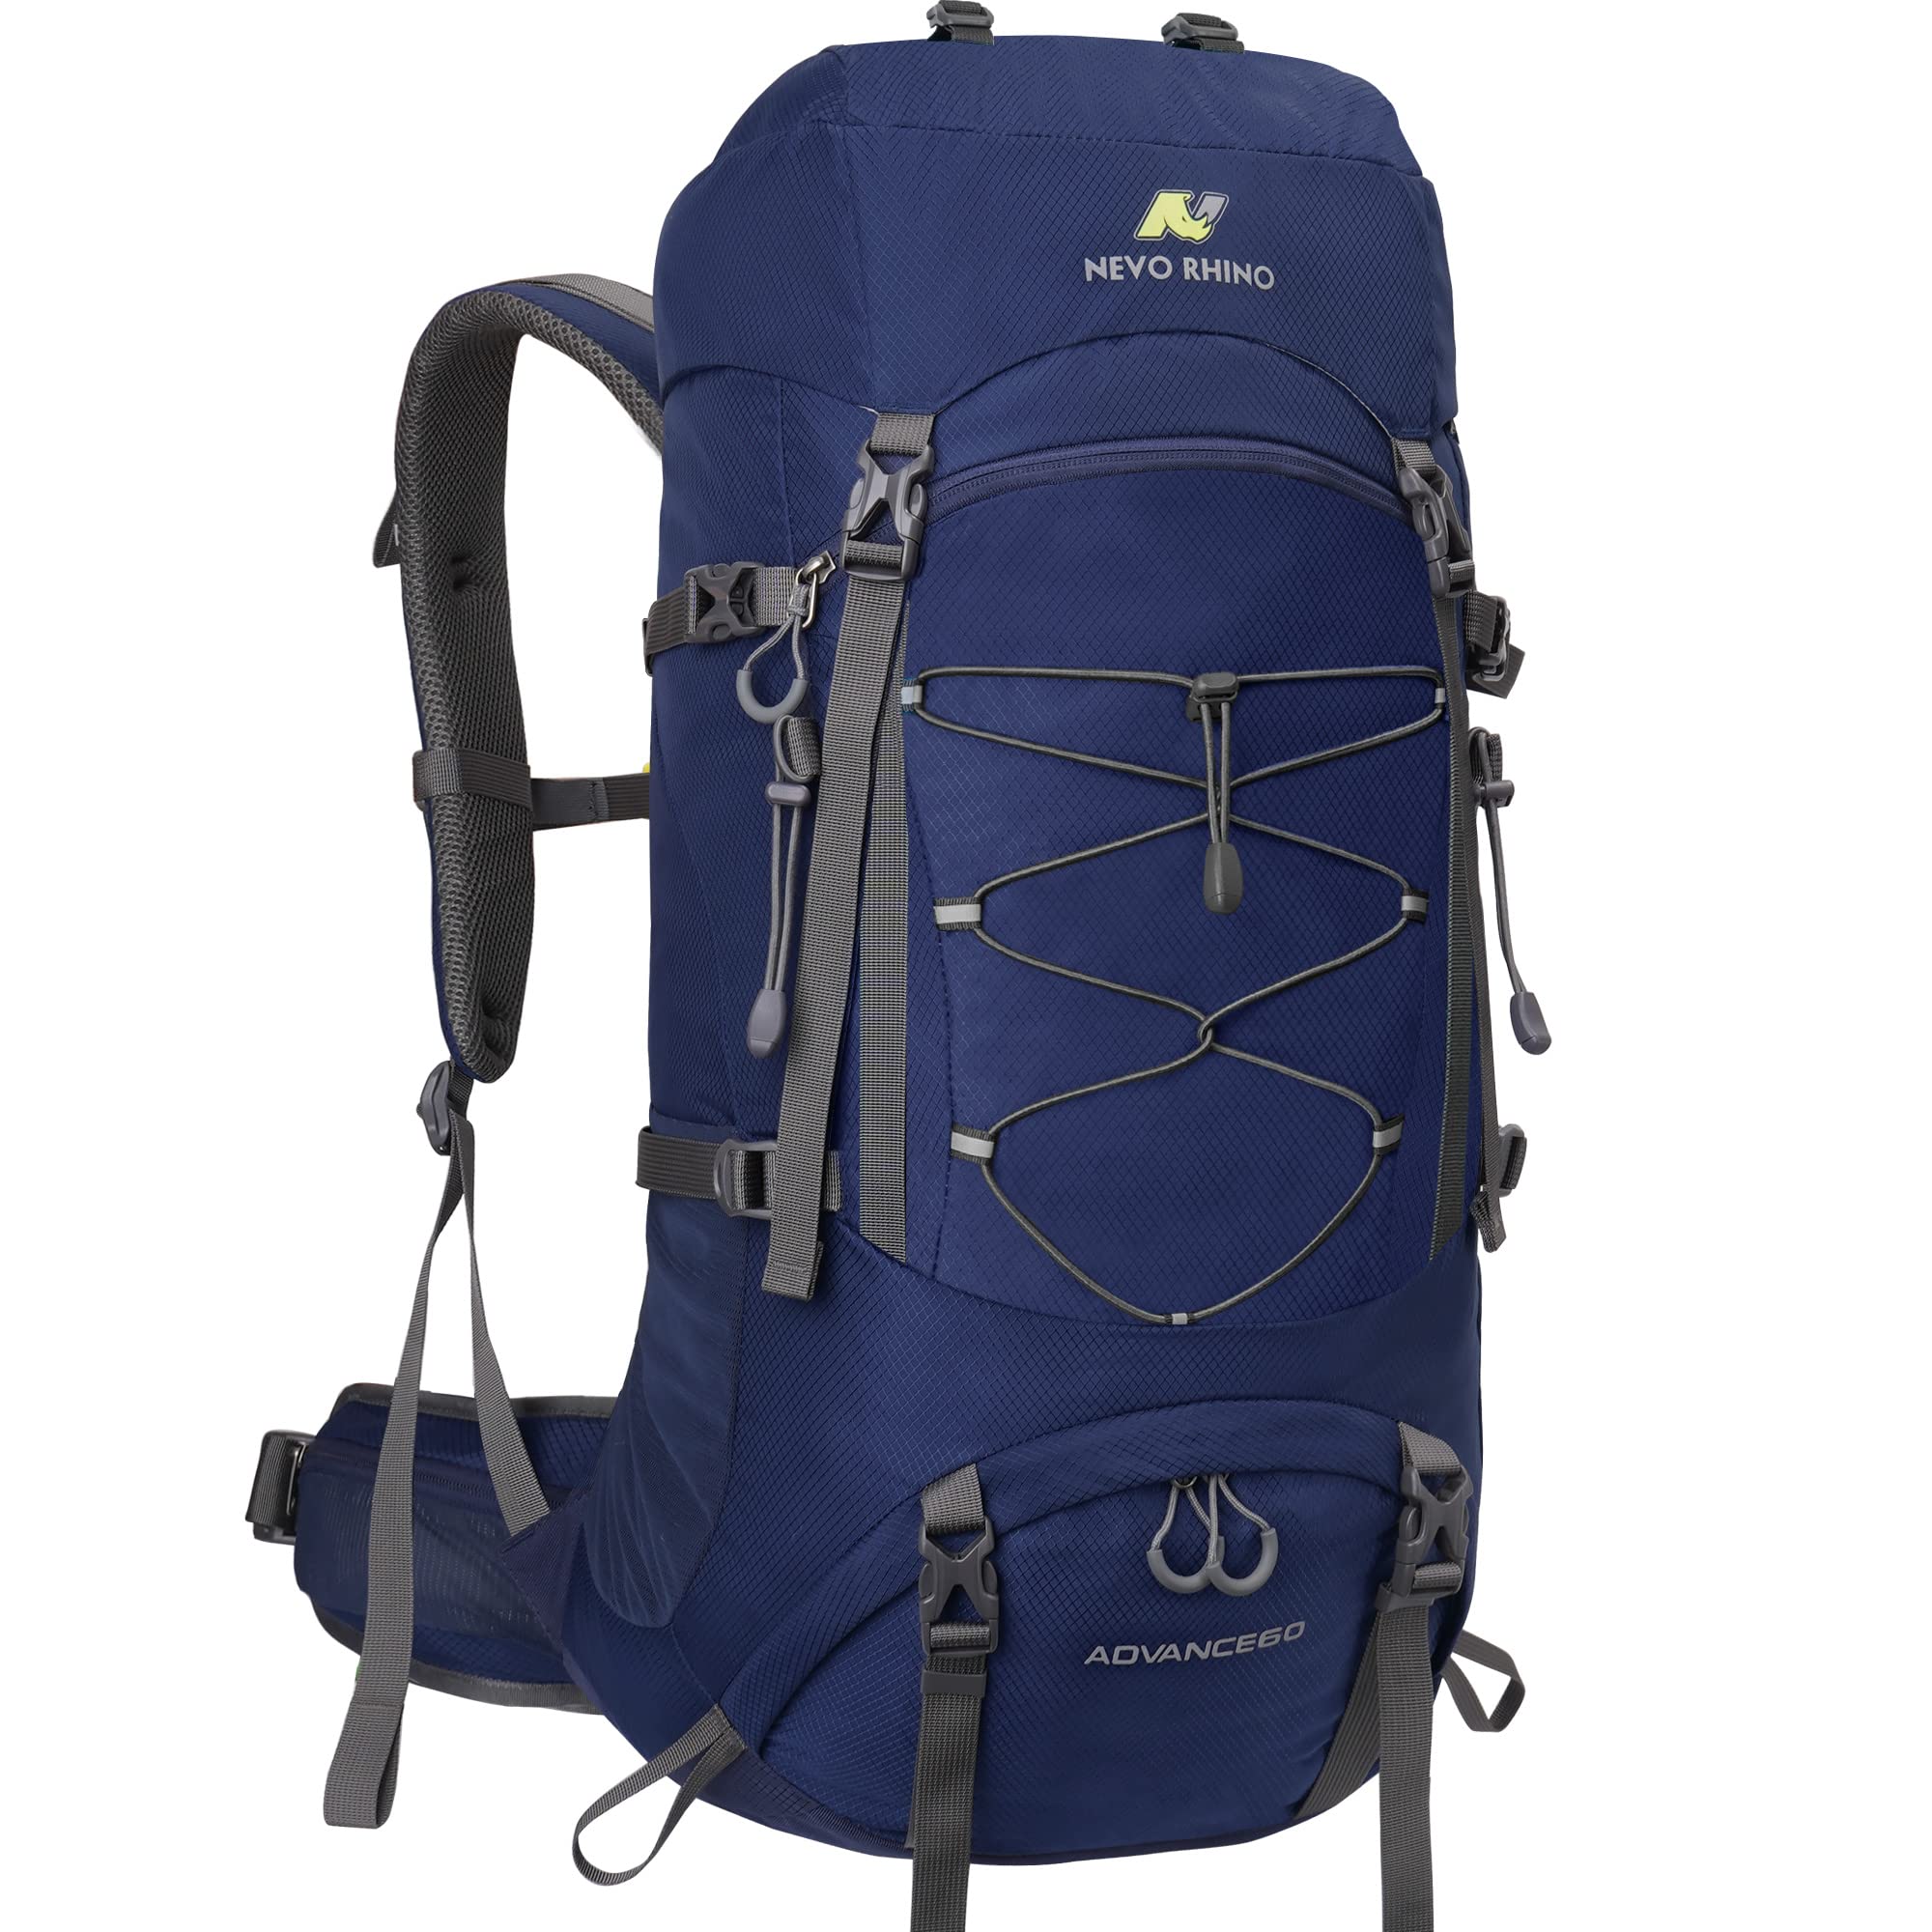 The Best Mountaineering Backpacks for Serious Climbers